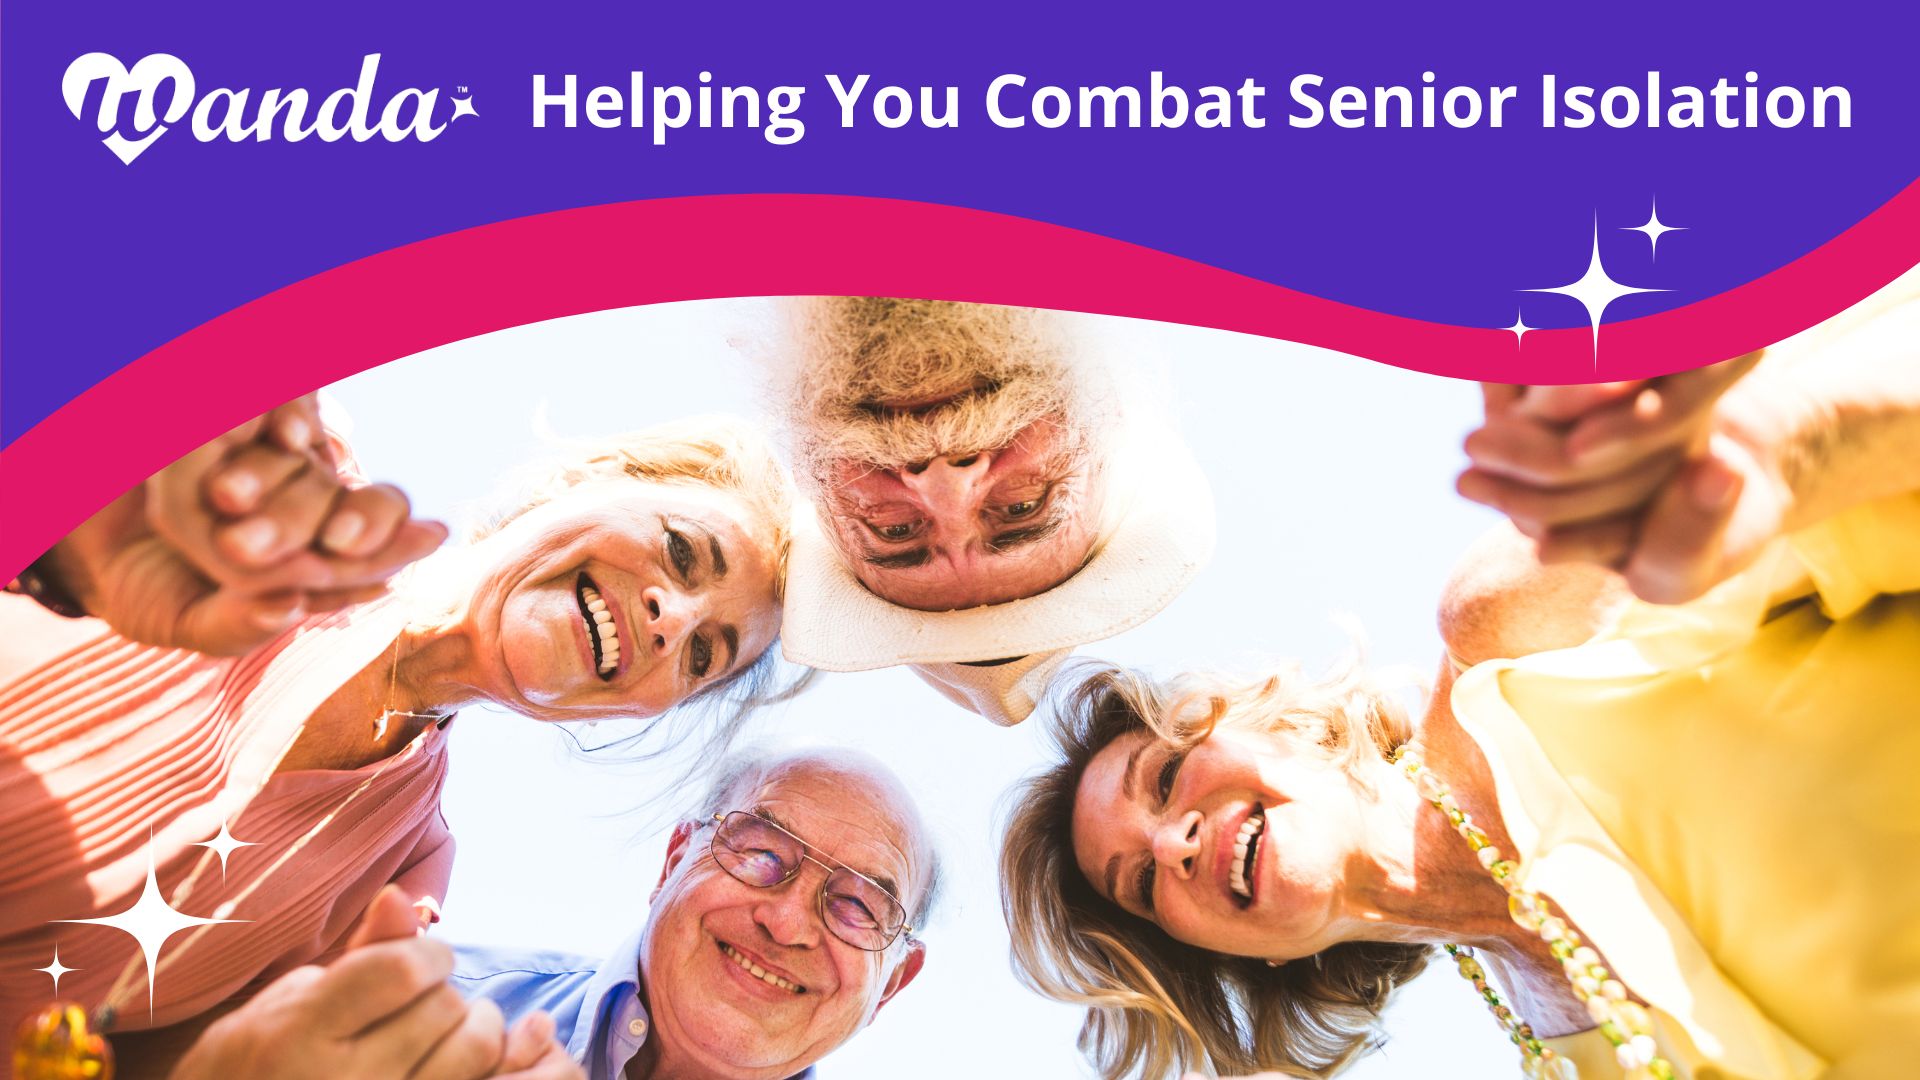 As we age, combatting senior loneliness is crucial for overall health and wellbeing. Check out Wanda's tips for staying active and engaged!